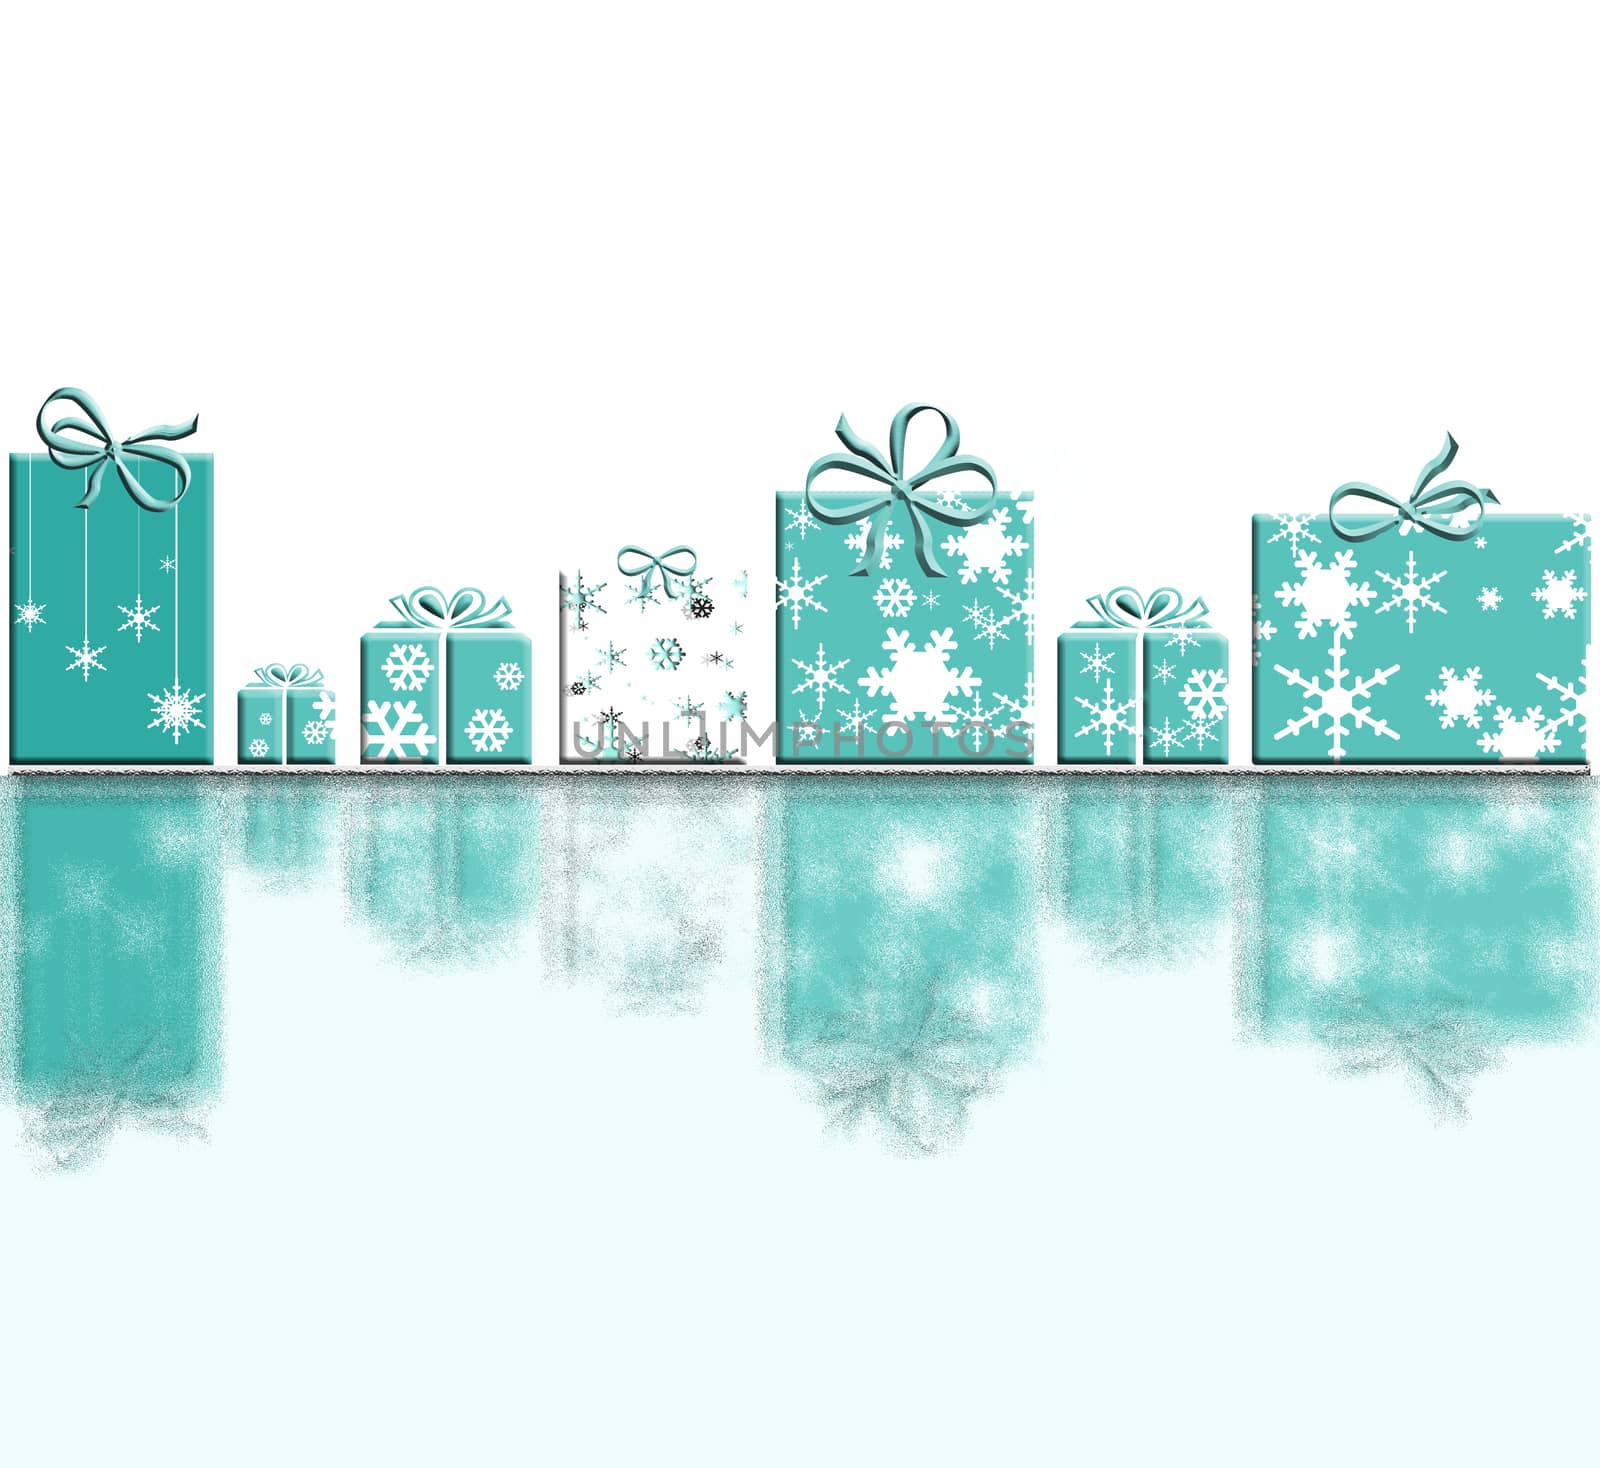 Elegant Christmas background with gift boxes made from snowflakes with reflection. Text Happy New Year 2021 and Merry Christmas in turquoise blue. 3D Illustration